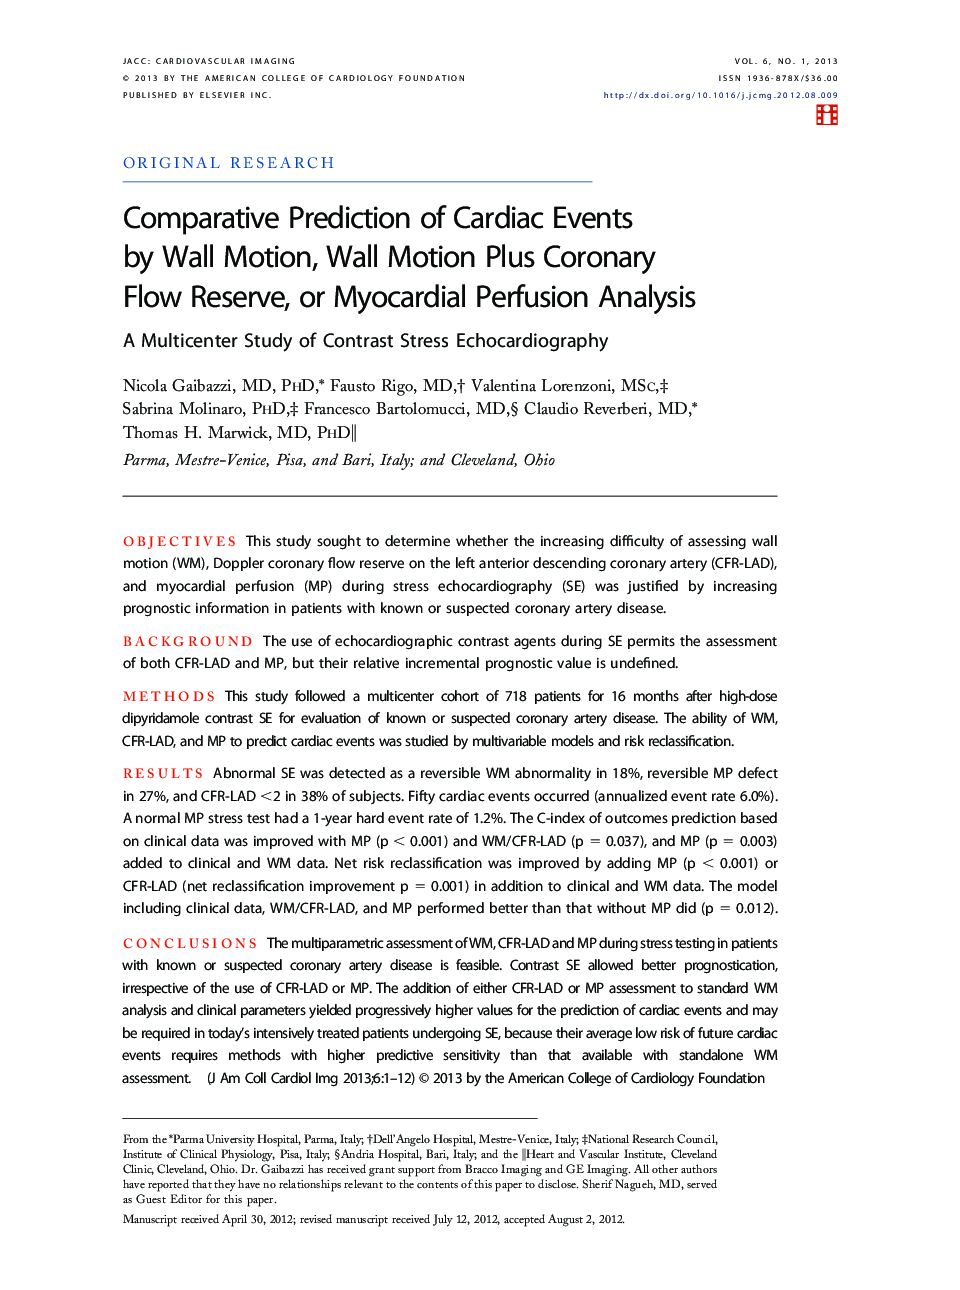 Comparative Prediction of Cardiac Events by Wall Motion, Wall Motion Plus Coronary Flow Reserve, or Myocardial Perfusion Analysis : A Multicenter Study of Contrast Stress Echocardiography